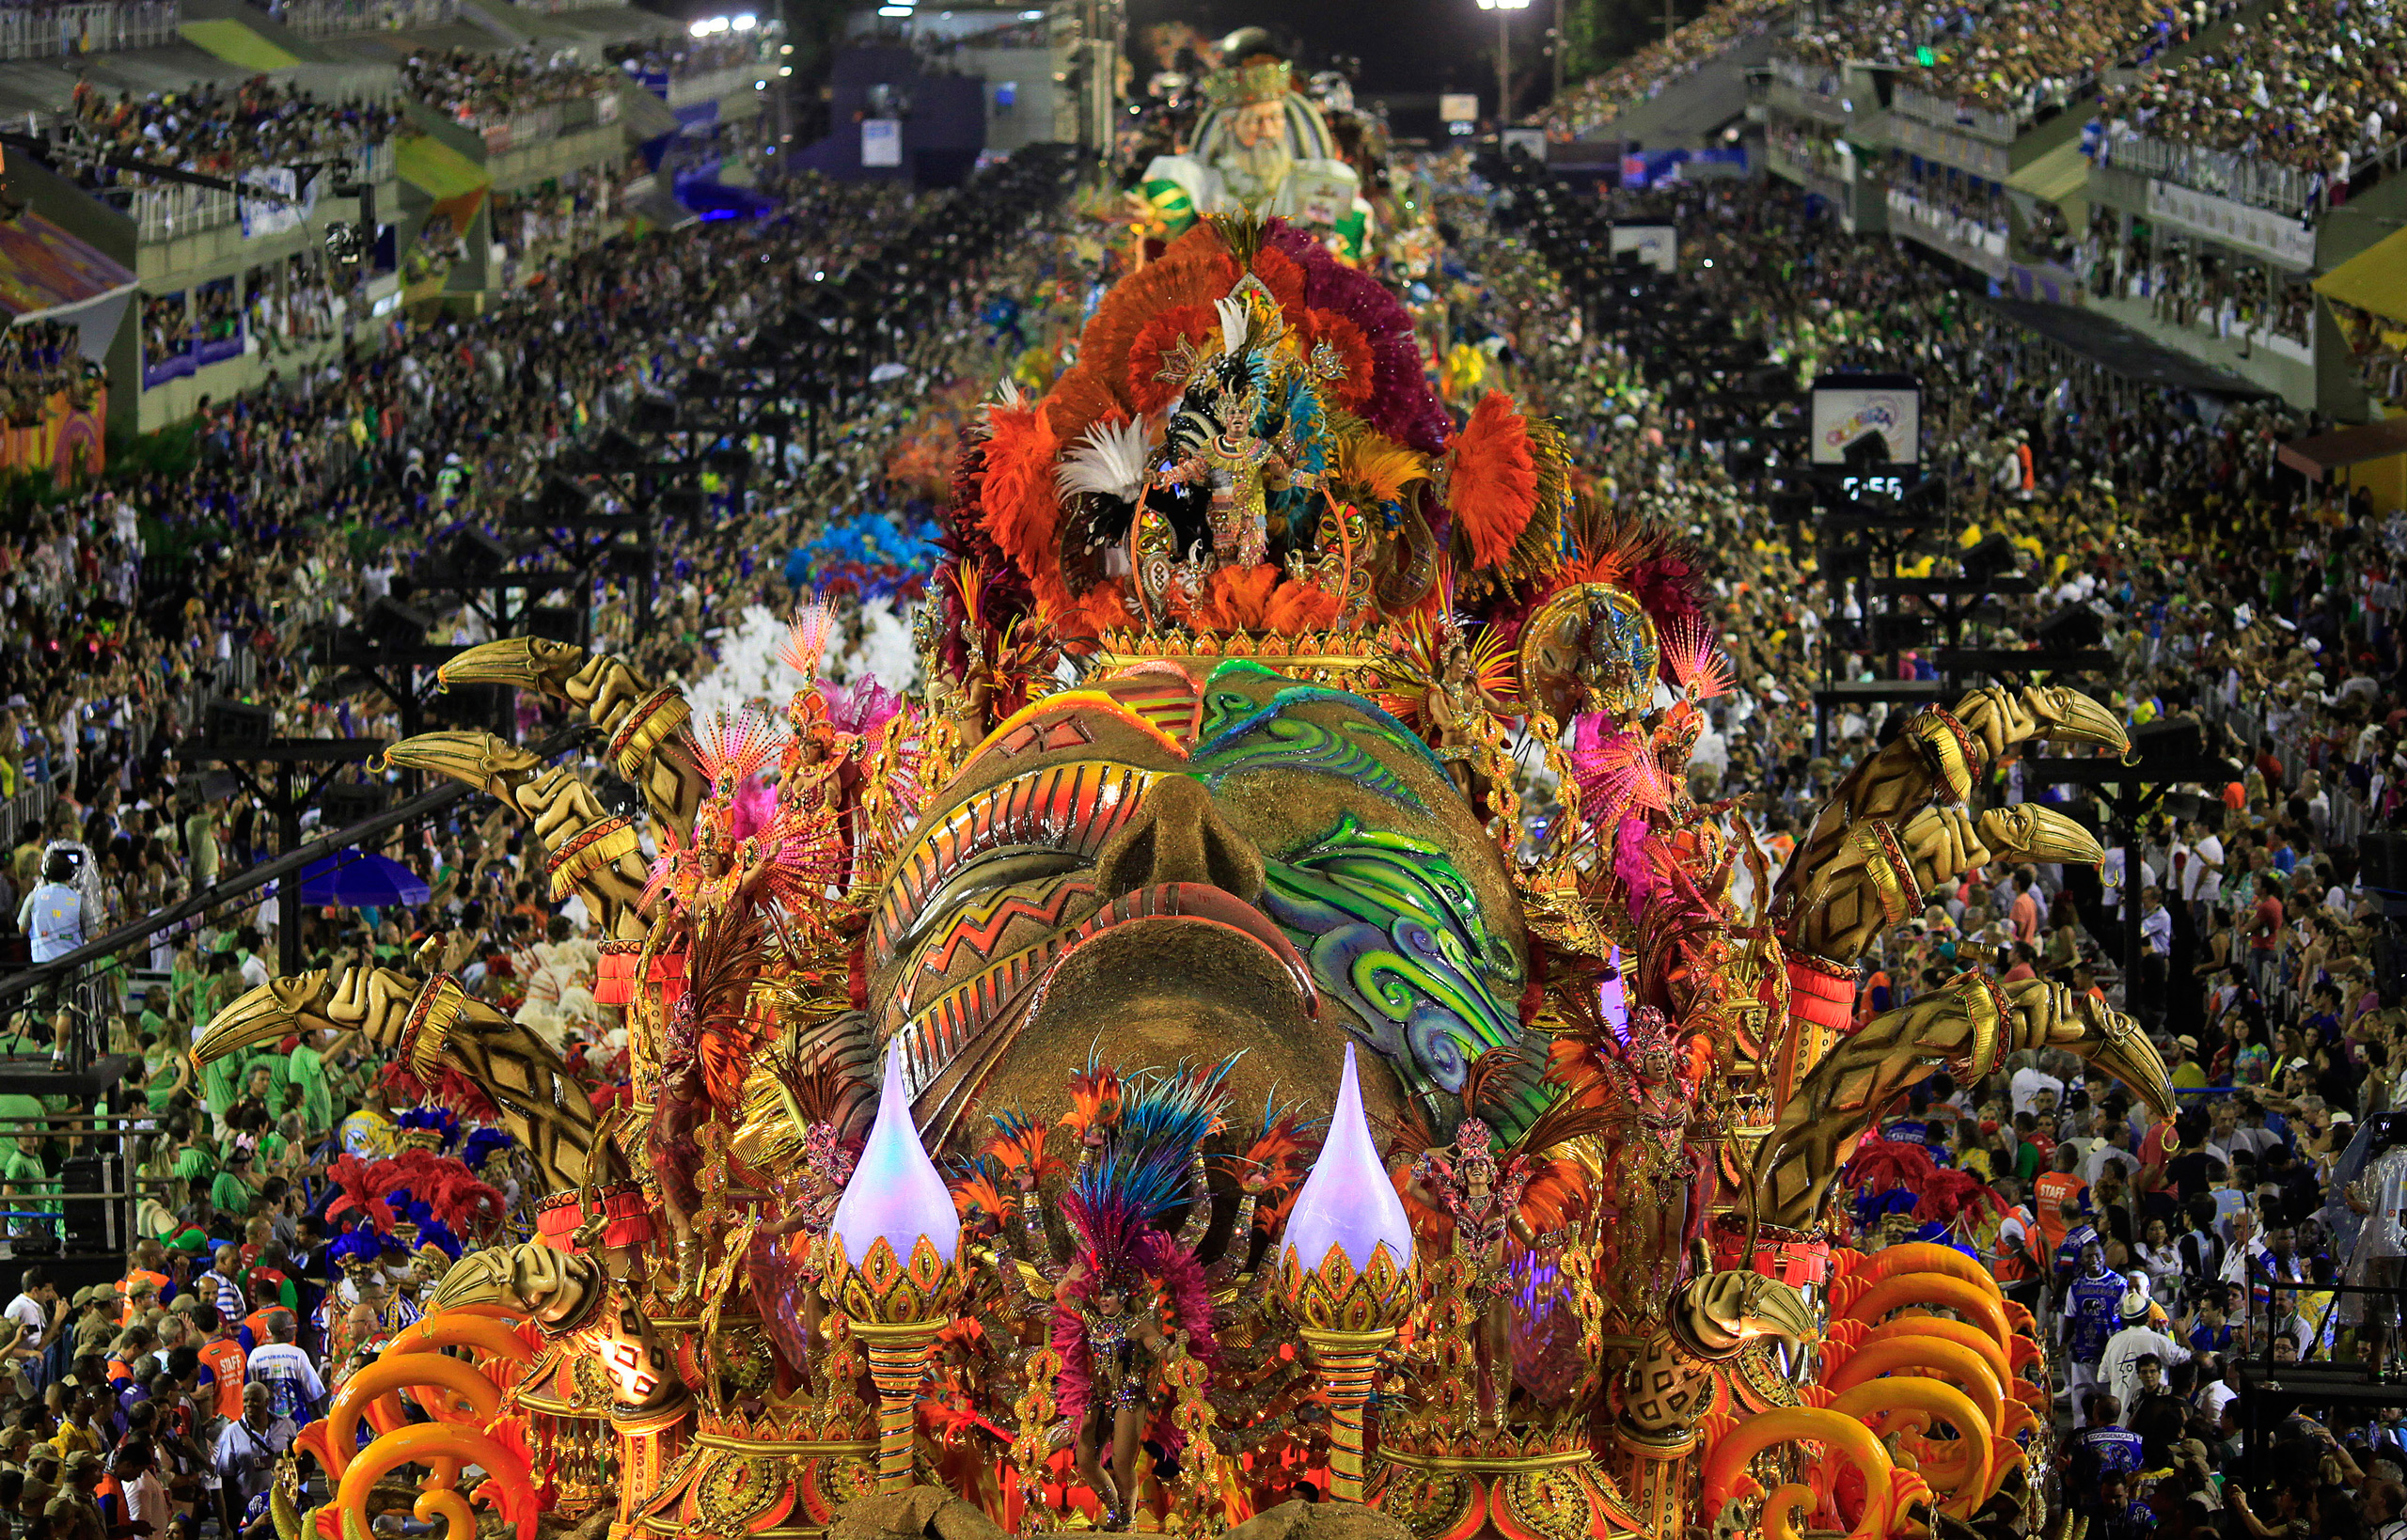 The Beija-Flor samba school parades during the Rio de Janeiro's Carnival February 17, 2015. The Carnival's jury named the group champion on Wednesday. Picture taken February 17, 2015. REUTERS/Ricardo Moraes (BRAZIL - Tags: SOCIETY TPX IMAGES OF THE DAY) - RTR4Q5PF